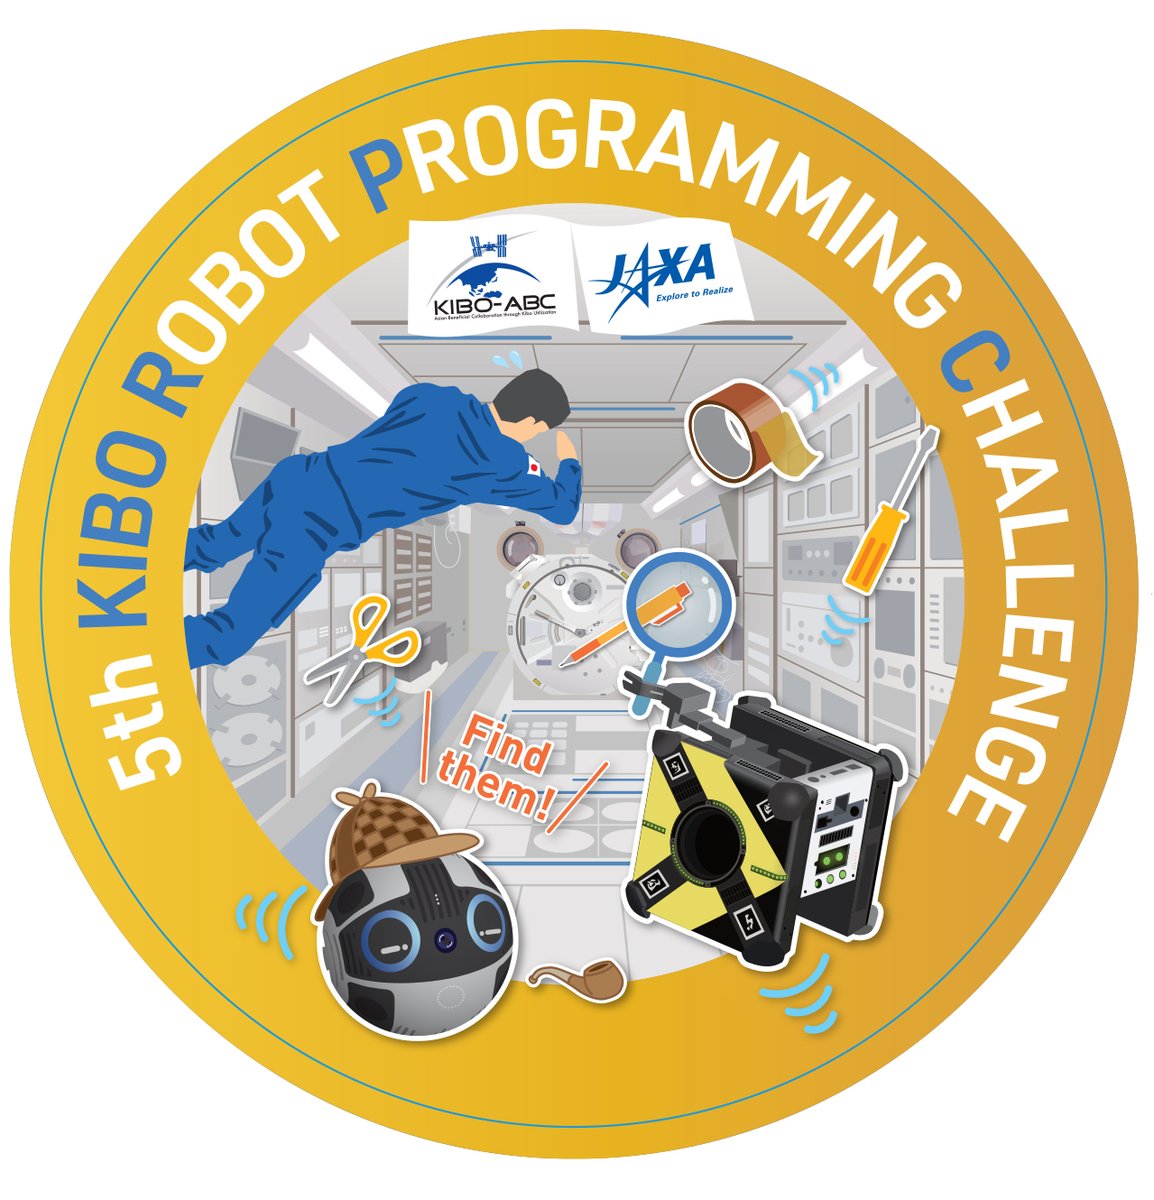 Join the fifth Kibo Robot Programming Challenge! This program is supported by @JAXA_en and @AusSpaceAgency ow.ly/BSwN50Rb1Yo #kiborpc #stem #space #jaxa #education #iss